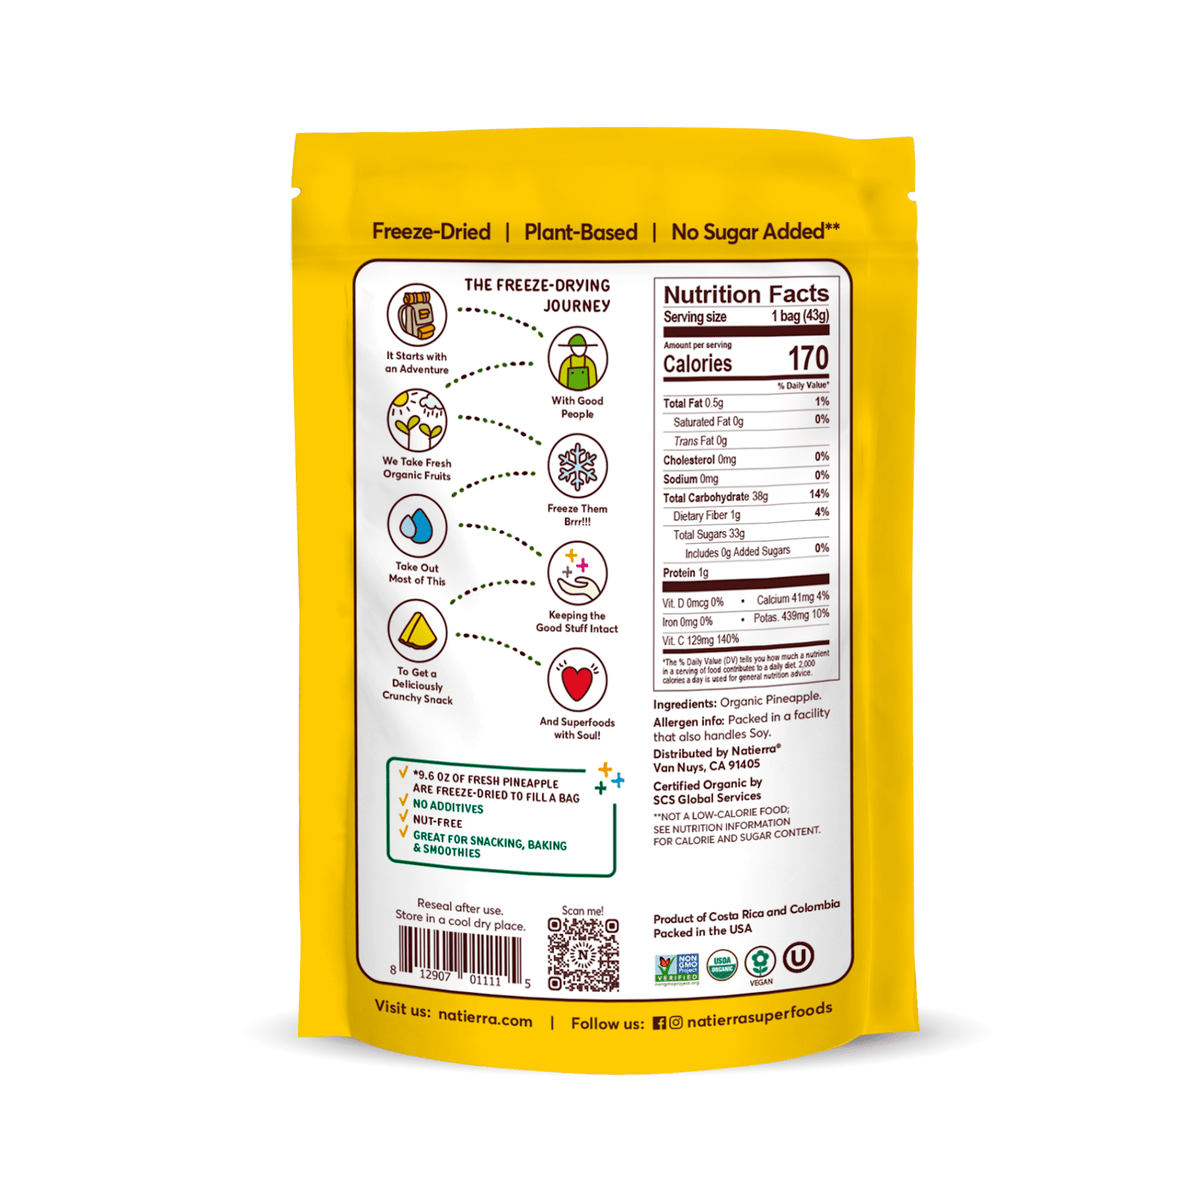 Natierra Organic Freeze-Dried Pineapple bag with Nutrition facts, journey and main product claims